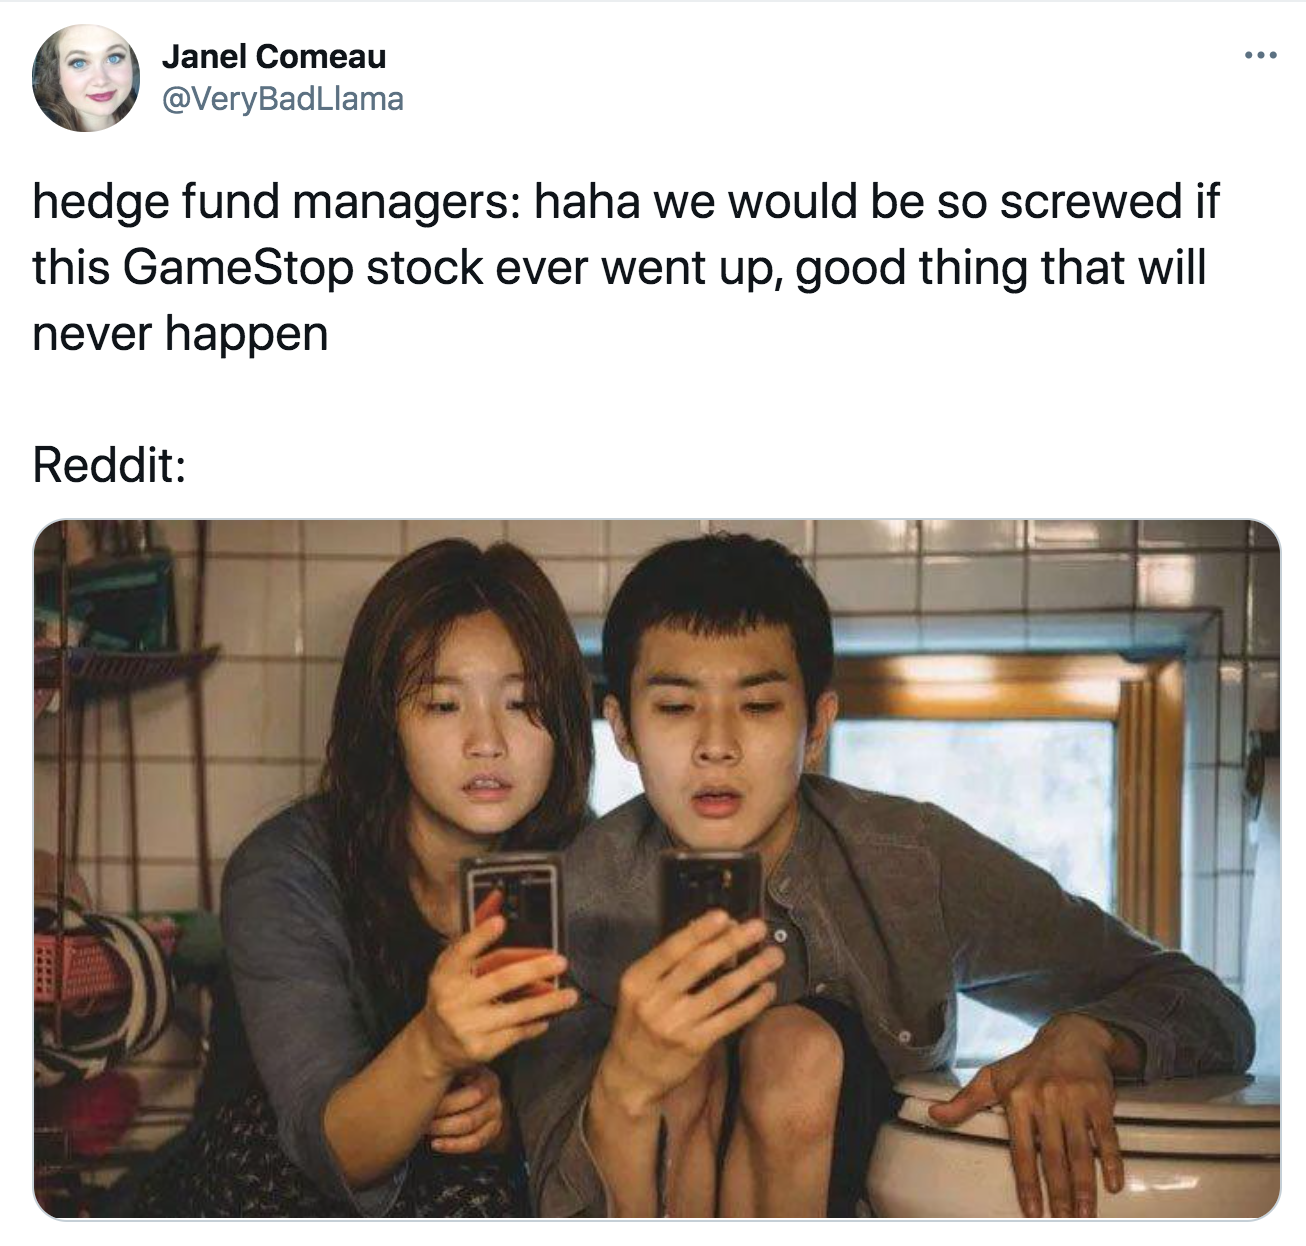 kim jeong parasite - Janel Comeau hedge fund managers haha we would be so screwed if this GameStop stock ever went up, good thing that will never happen Reddit